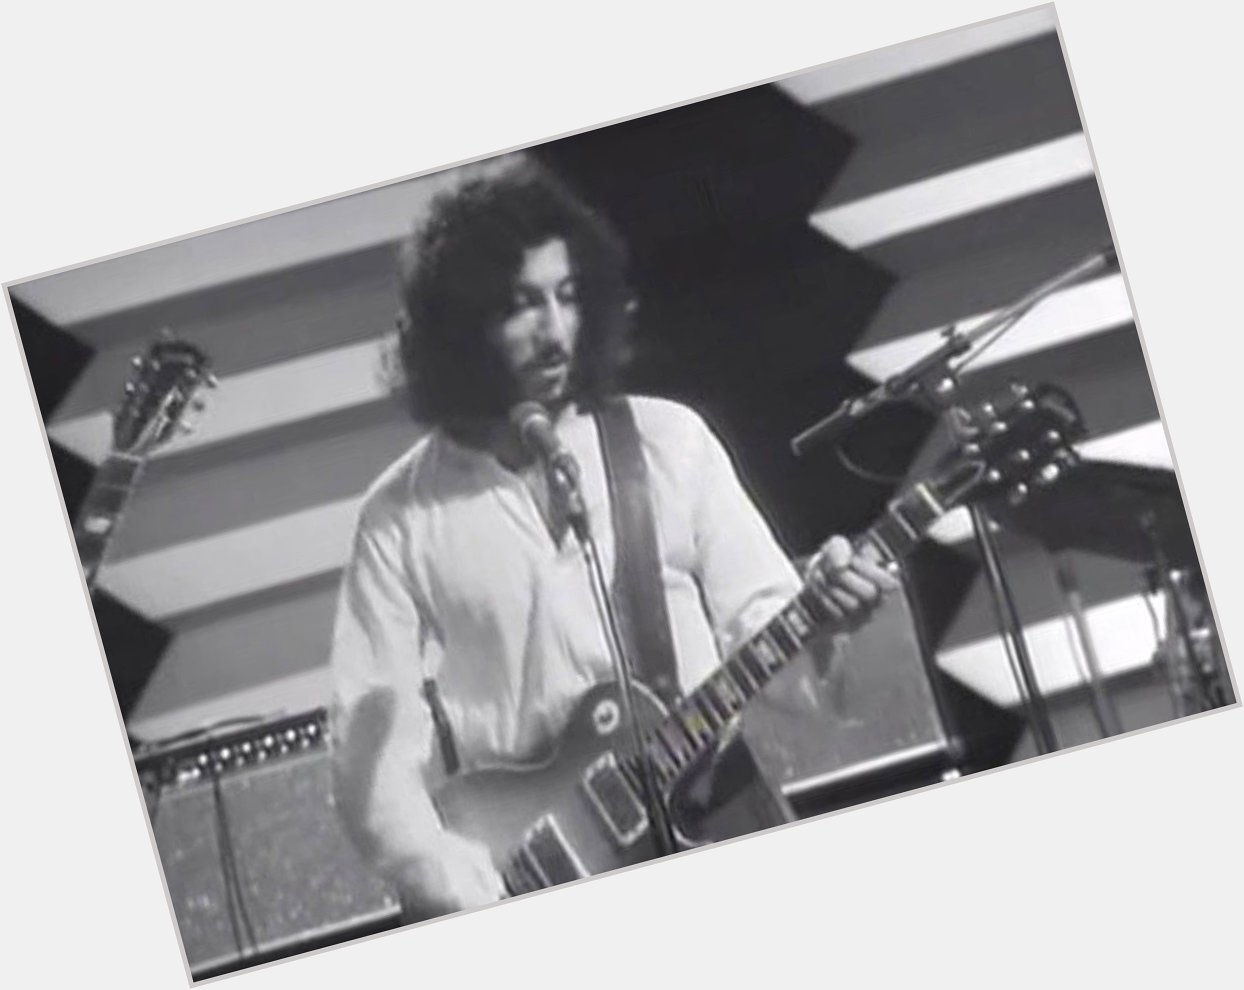 Happy Birthday the amazing Peter Green! In my opinion a very underrated guitarist. 